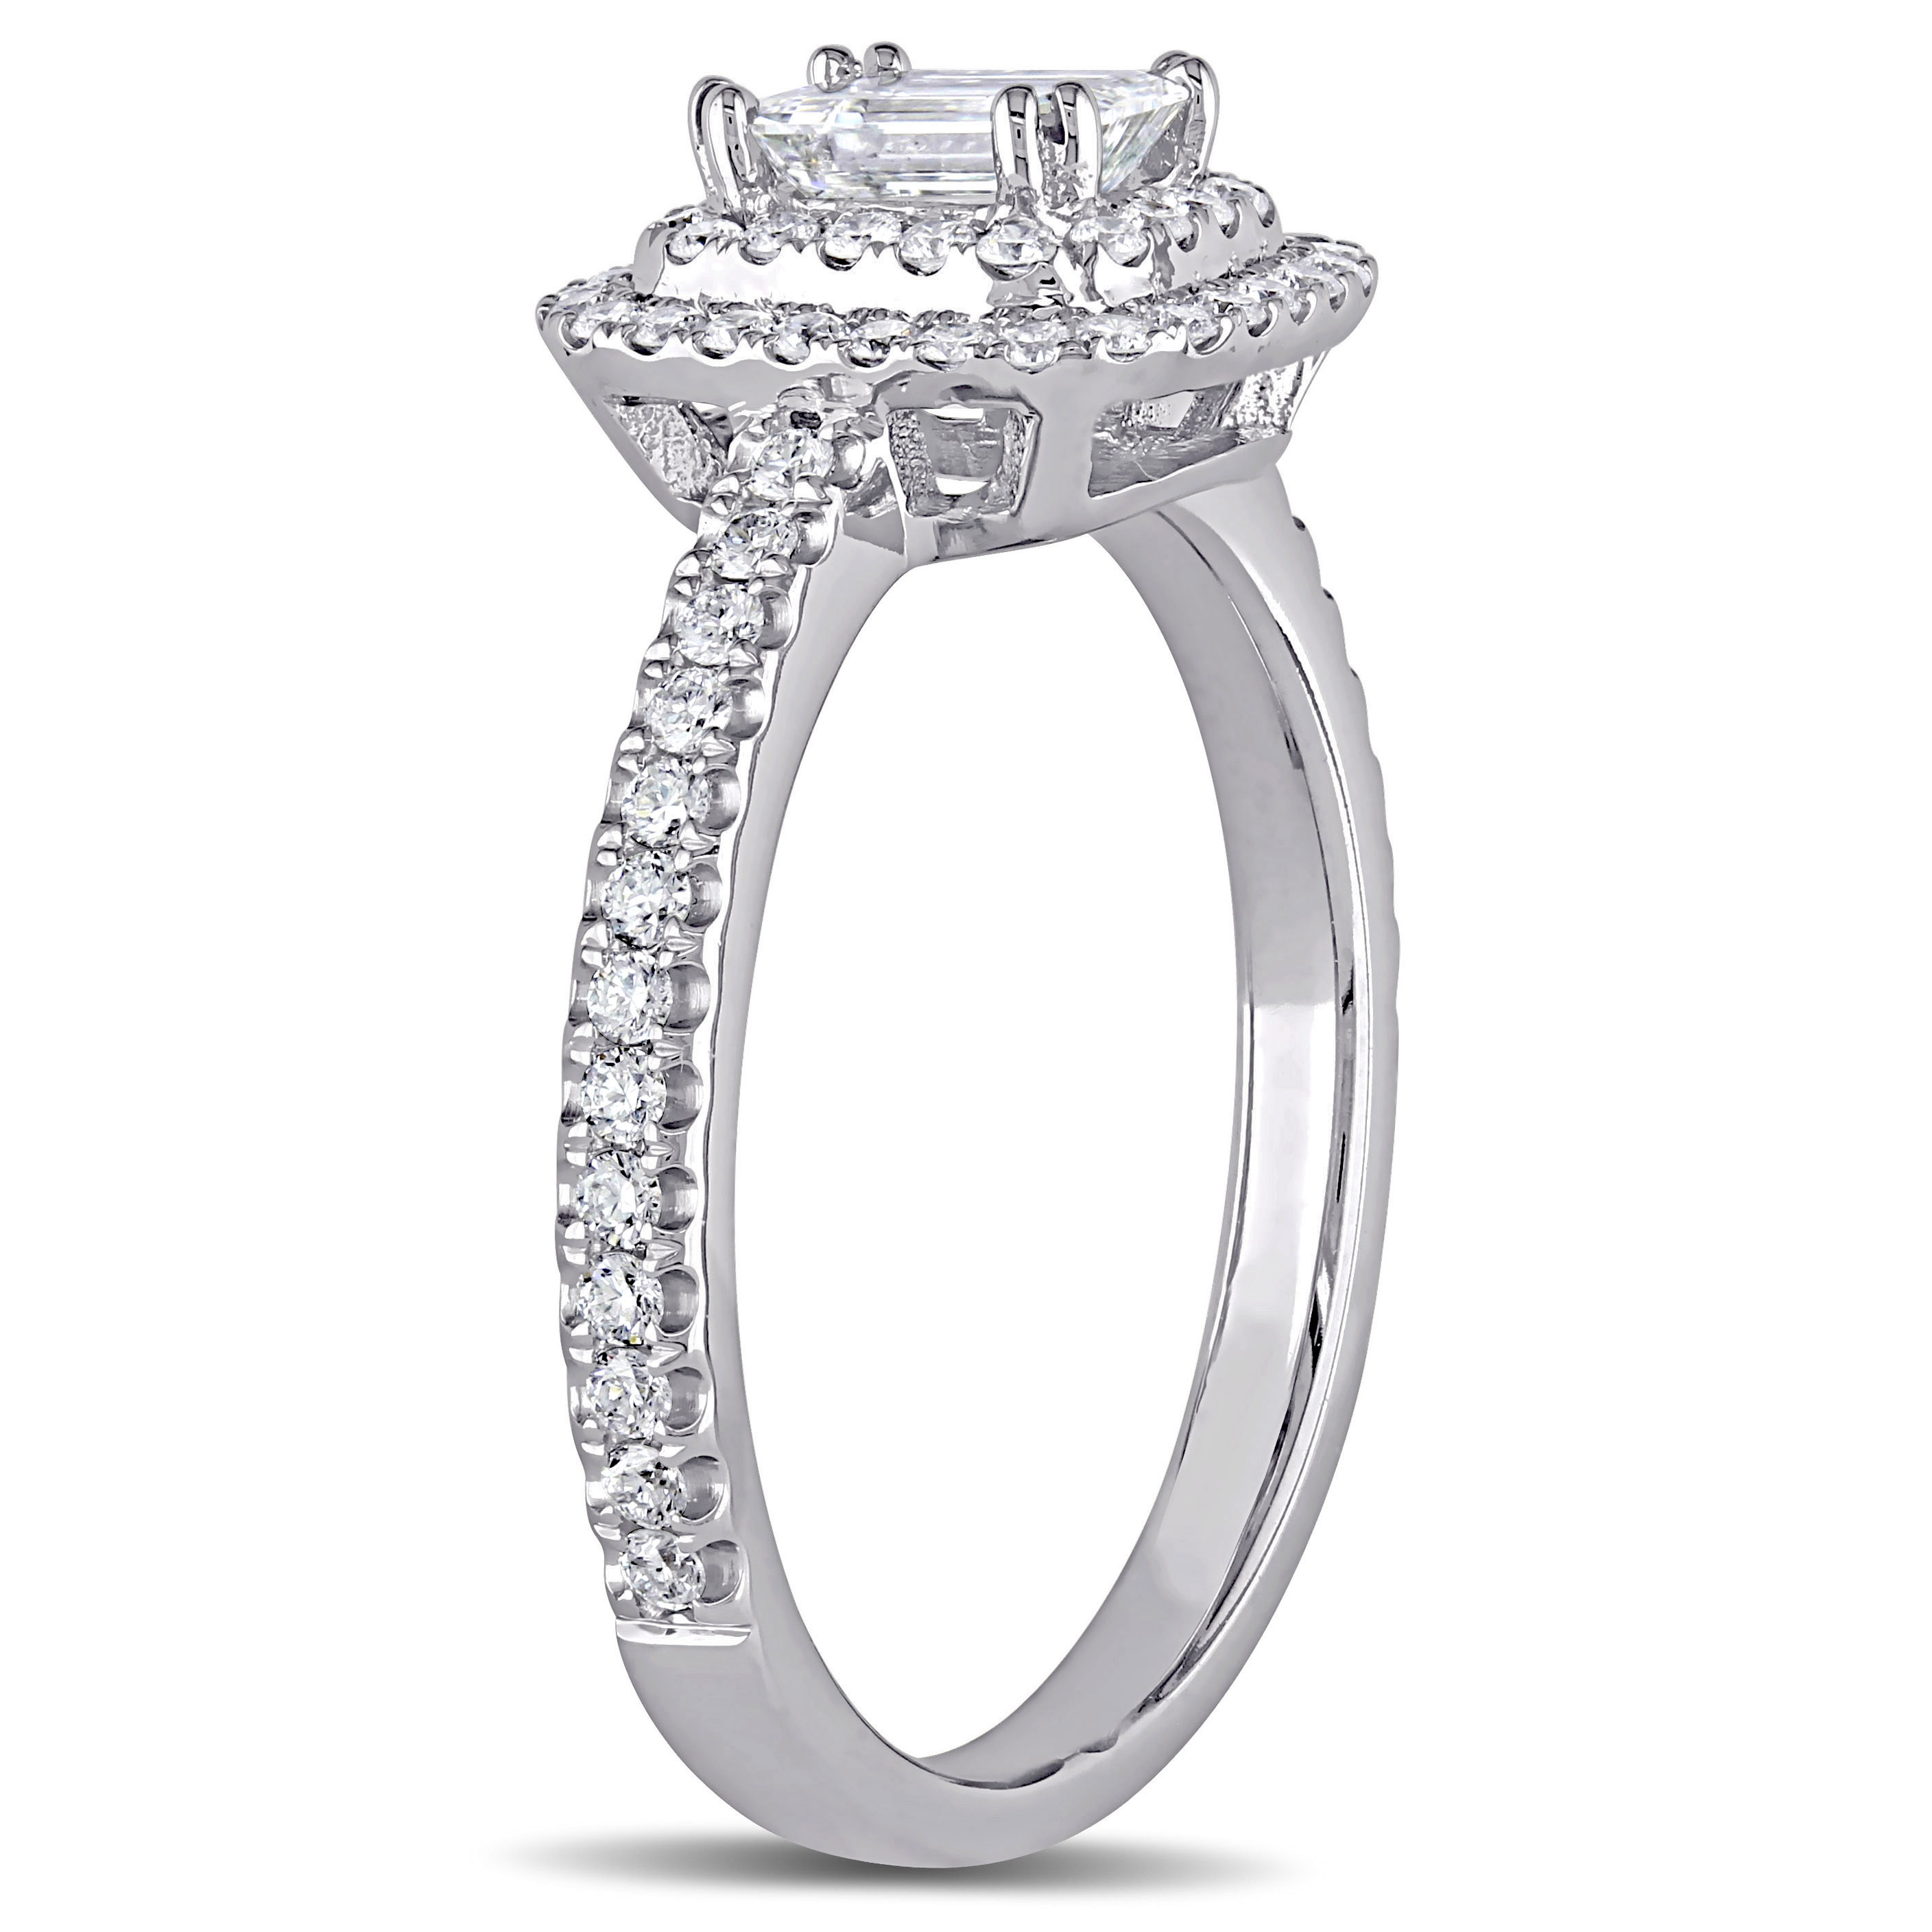 1 CT TW Emerald Cut and Round Diamond Double Halo Engagement Ring in ...